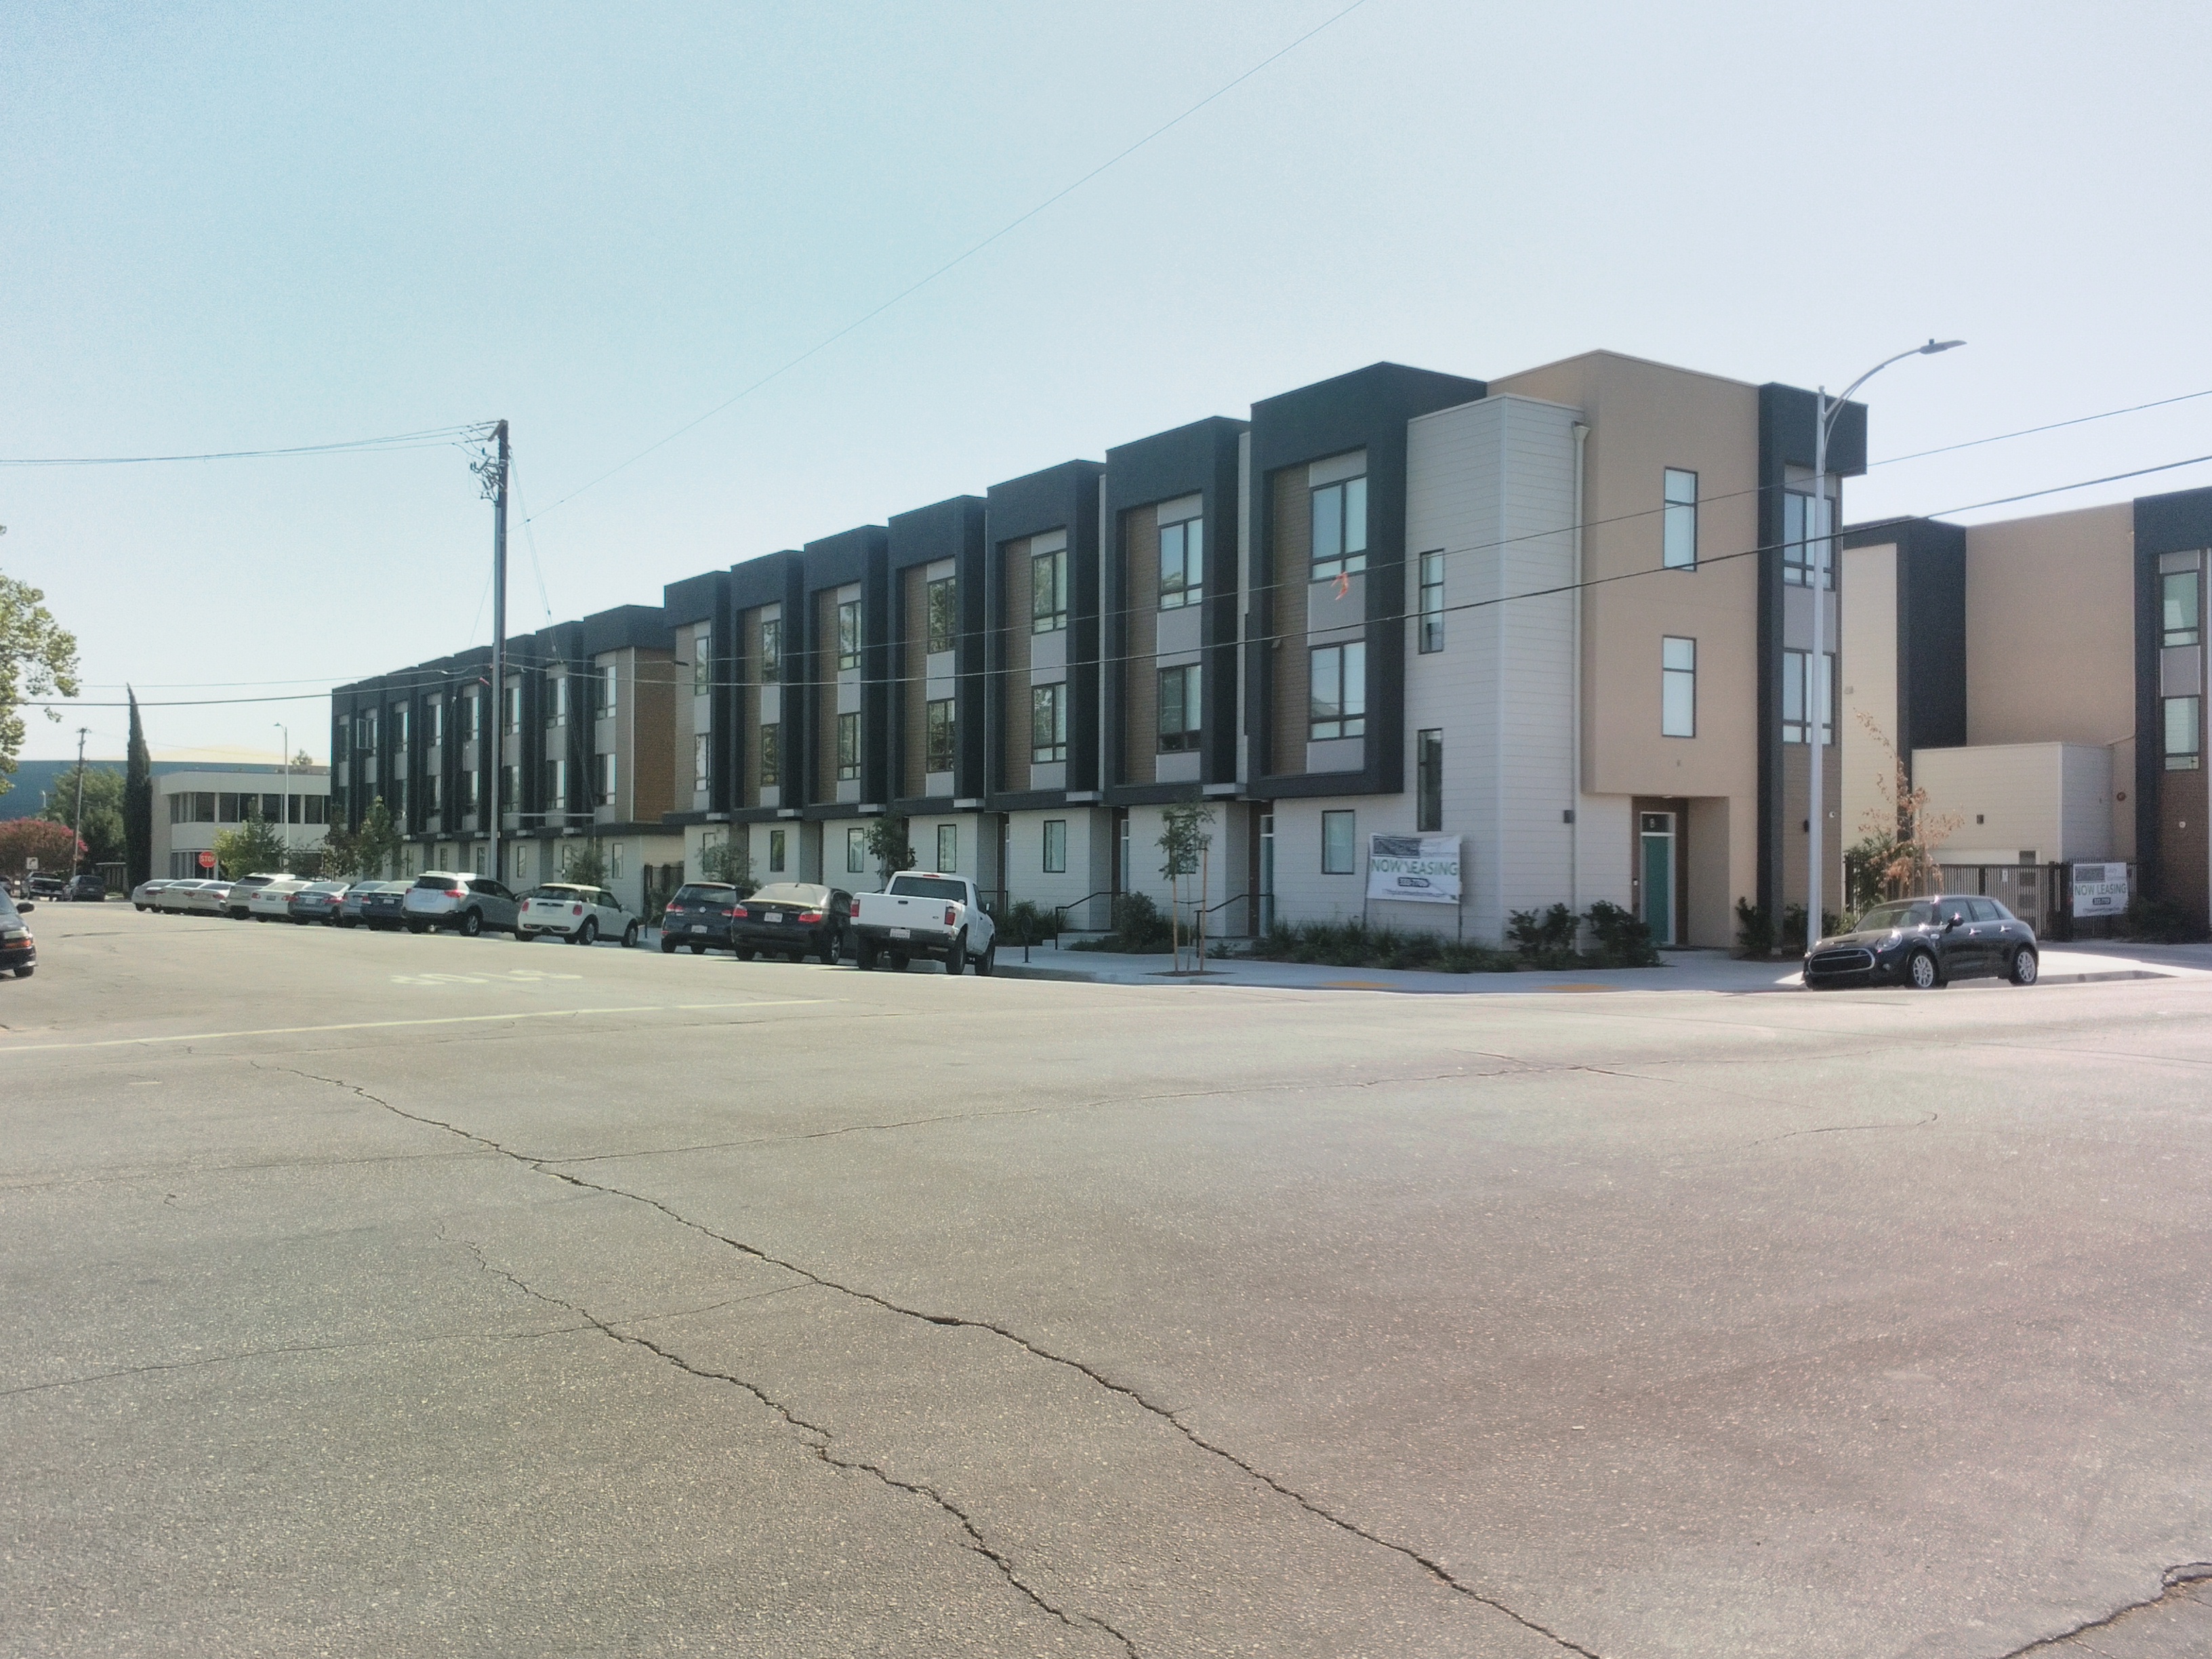 A New Urbanist row of townhouses that went up a couple years ago.